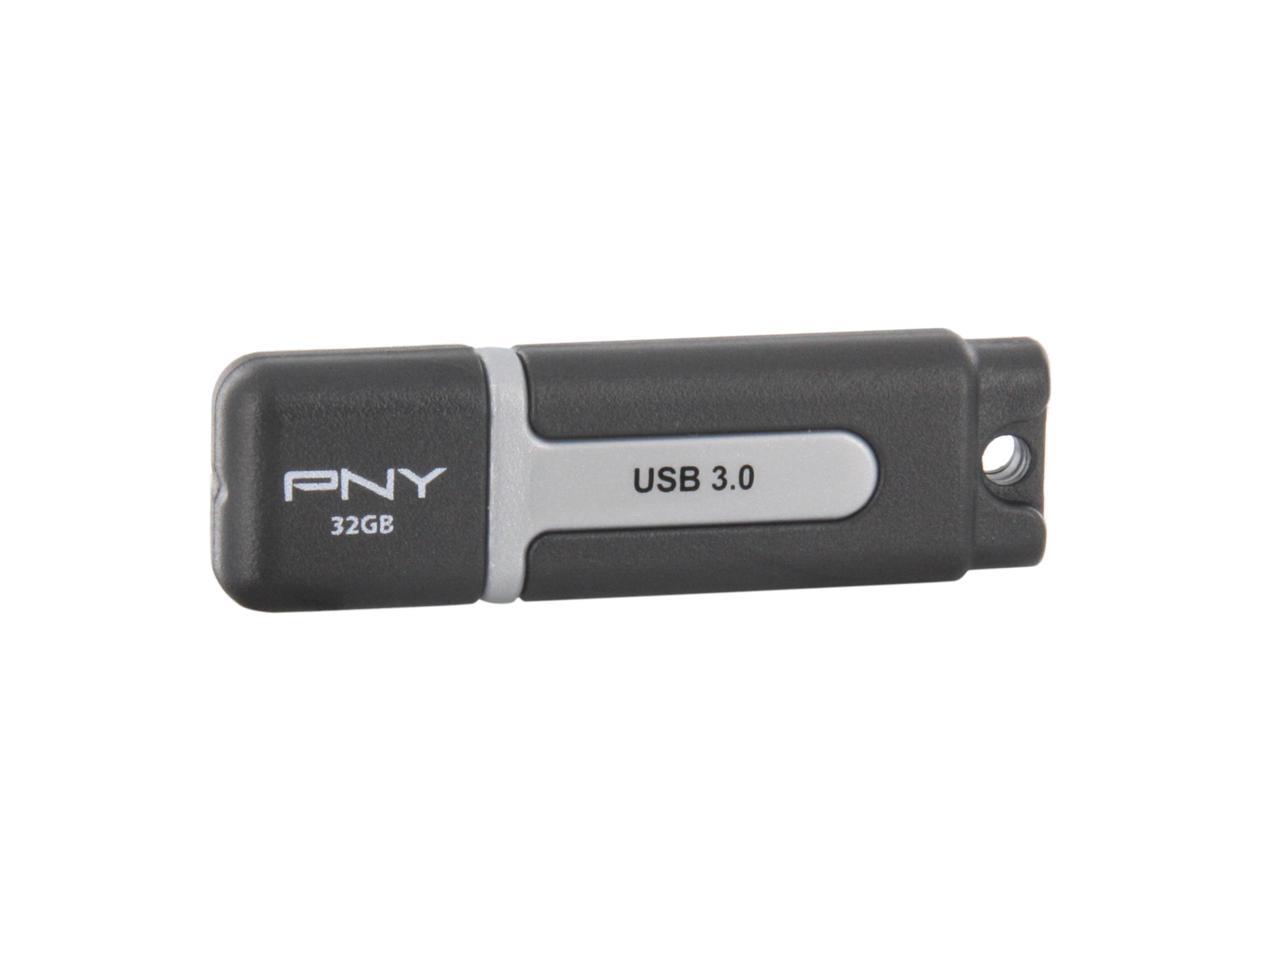 pny 256gb flash drive works only usb 2.0 slot